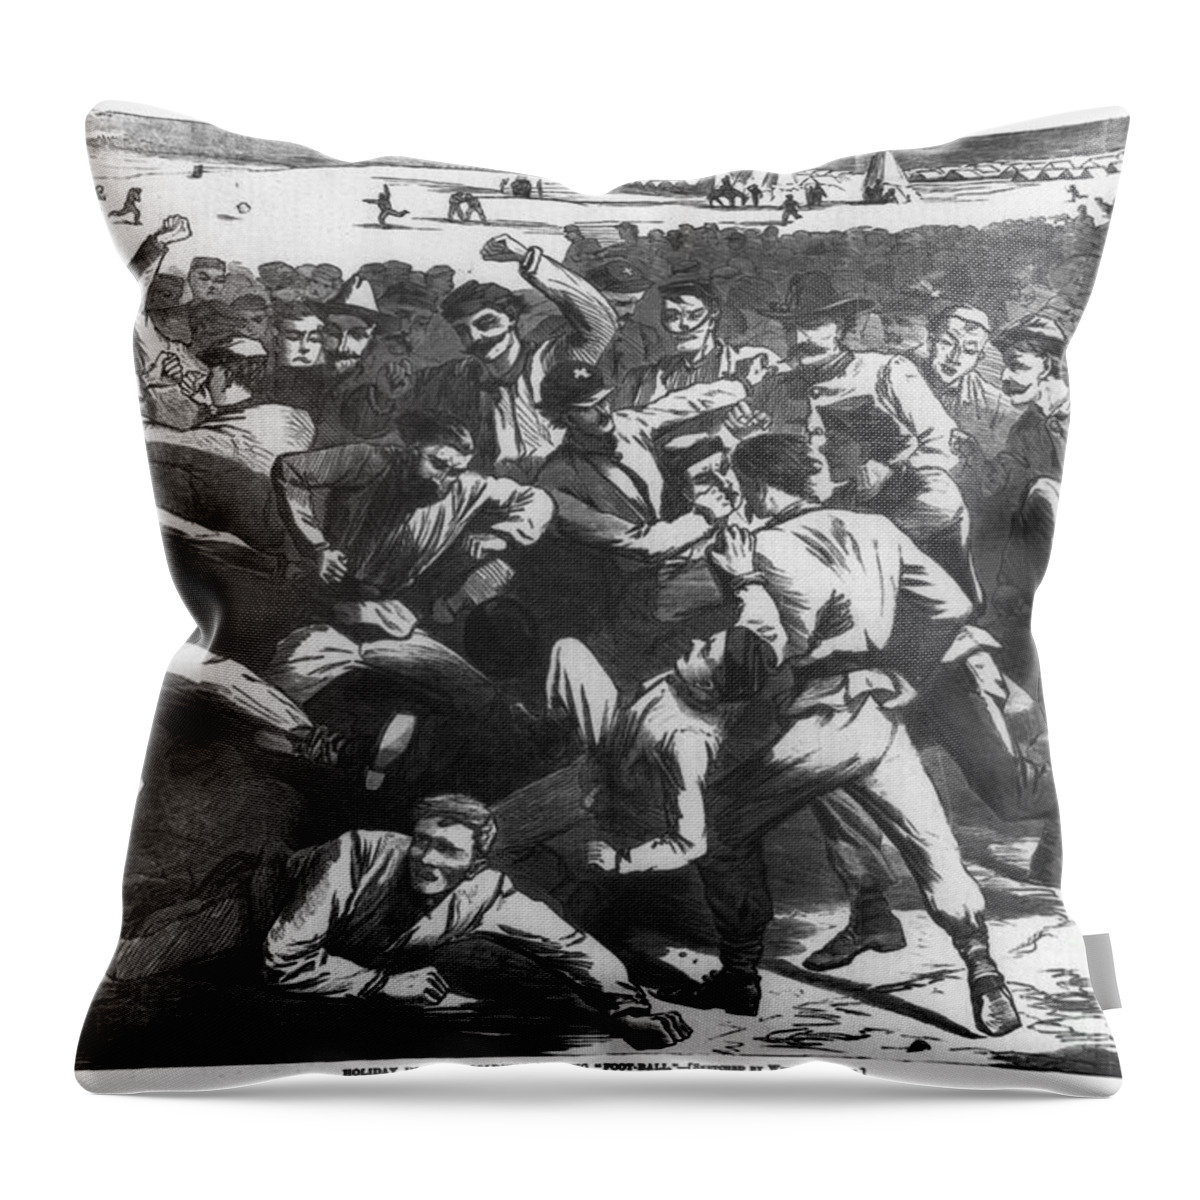 1865 Throw Pillow featuring the photograph Football: Soldiers, 1865 by Granger